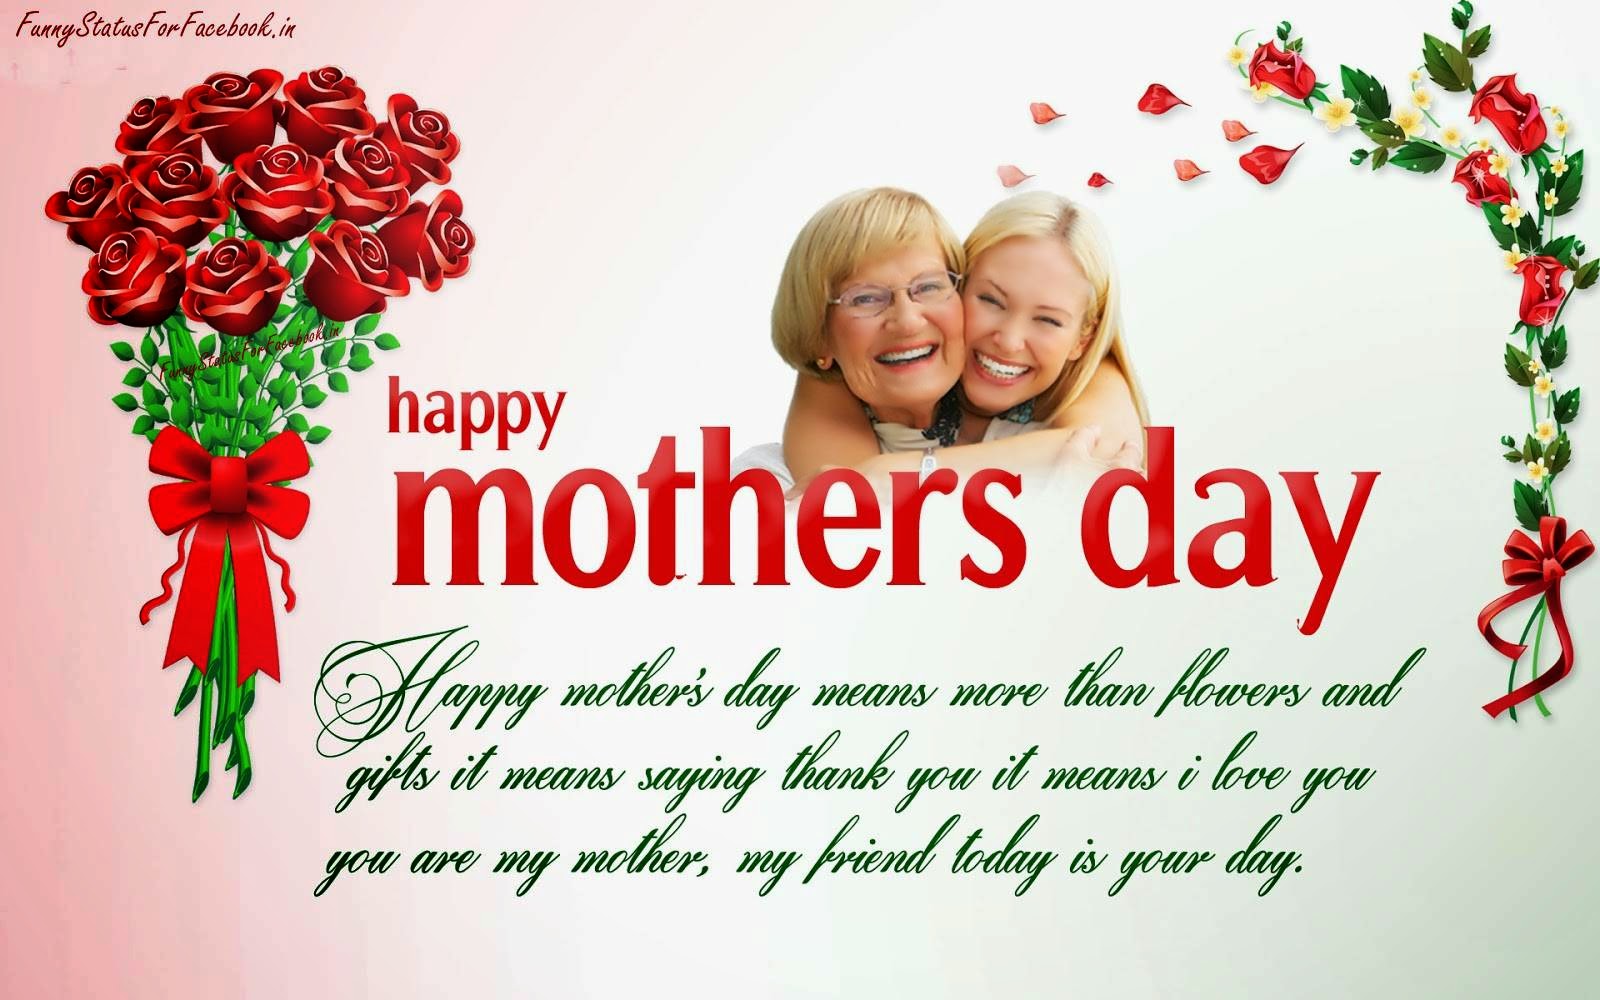 Happy Mothers Day Quotes Greeting Cards Wallpapers With Messages Best Shayari And Sms Collection 